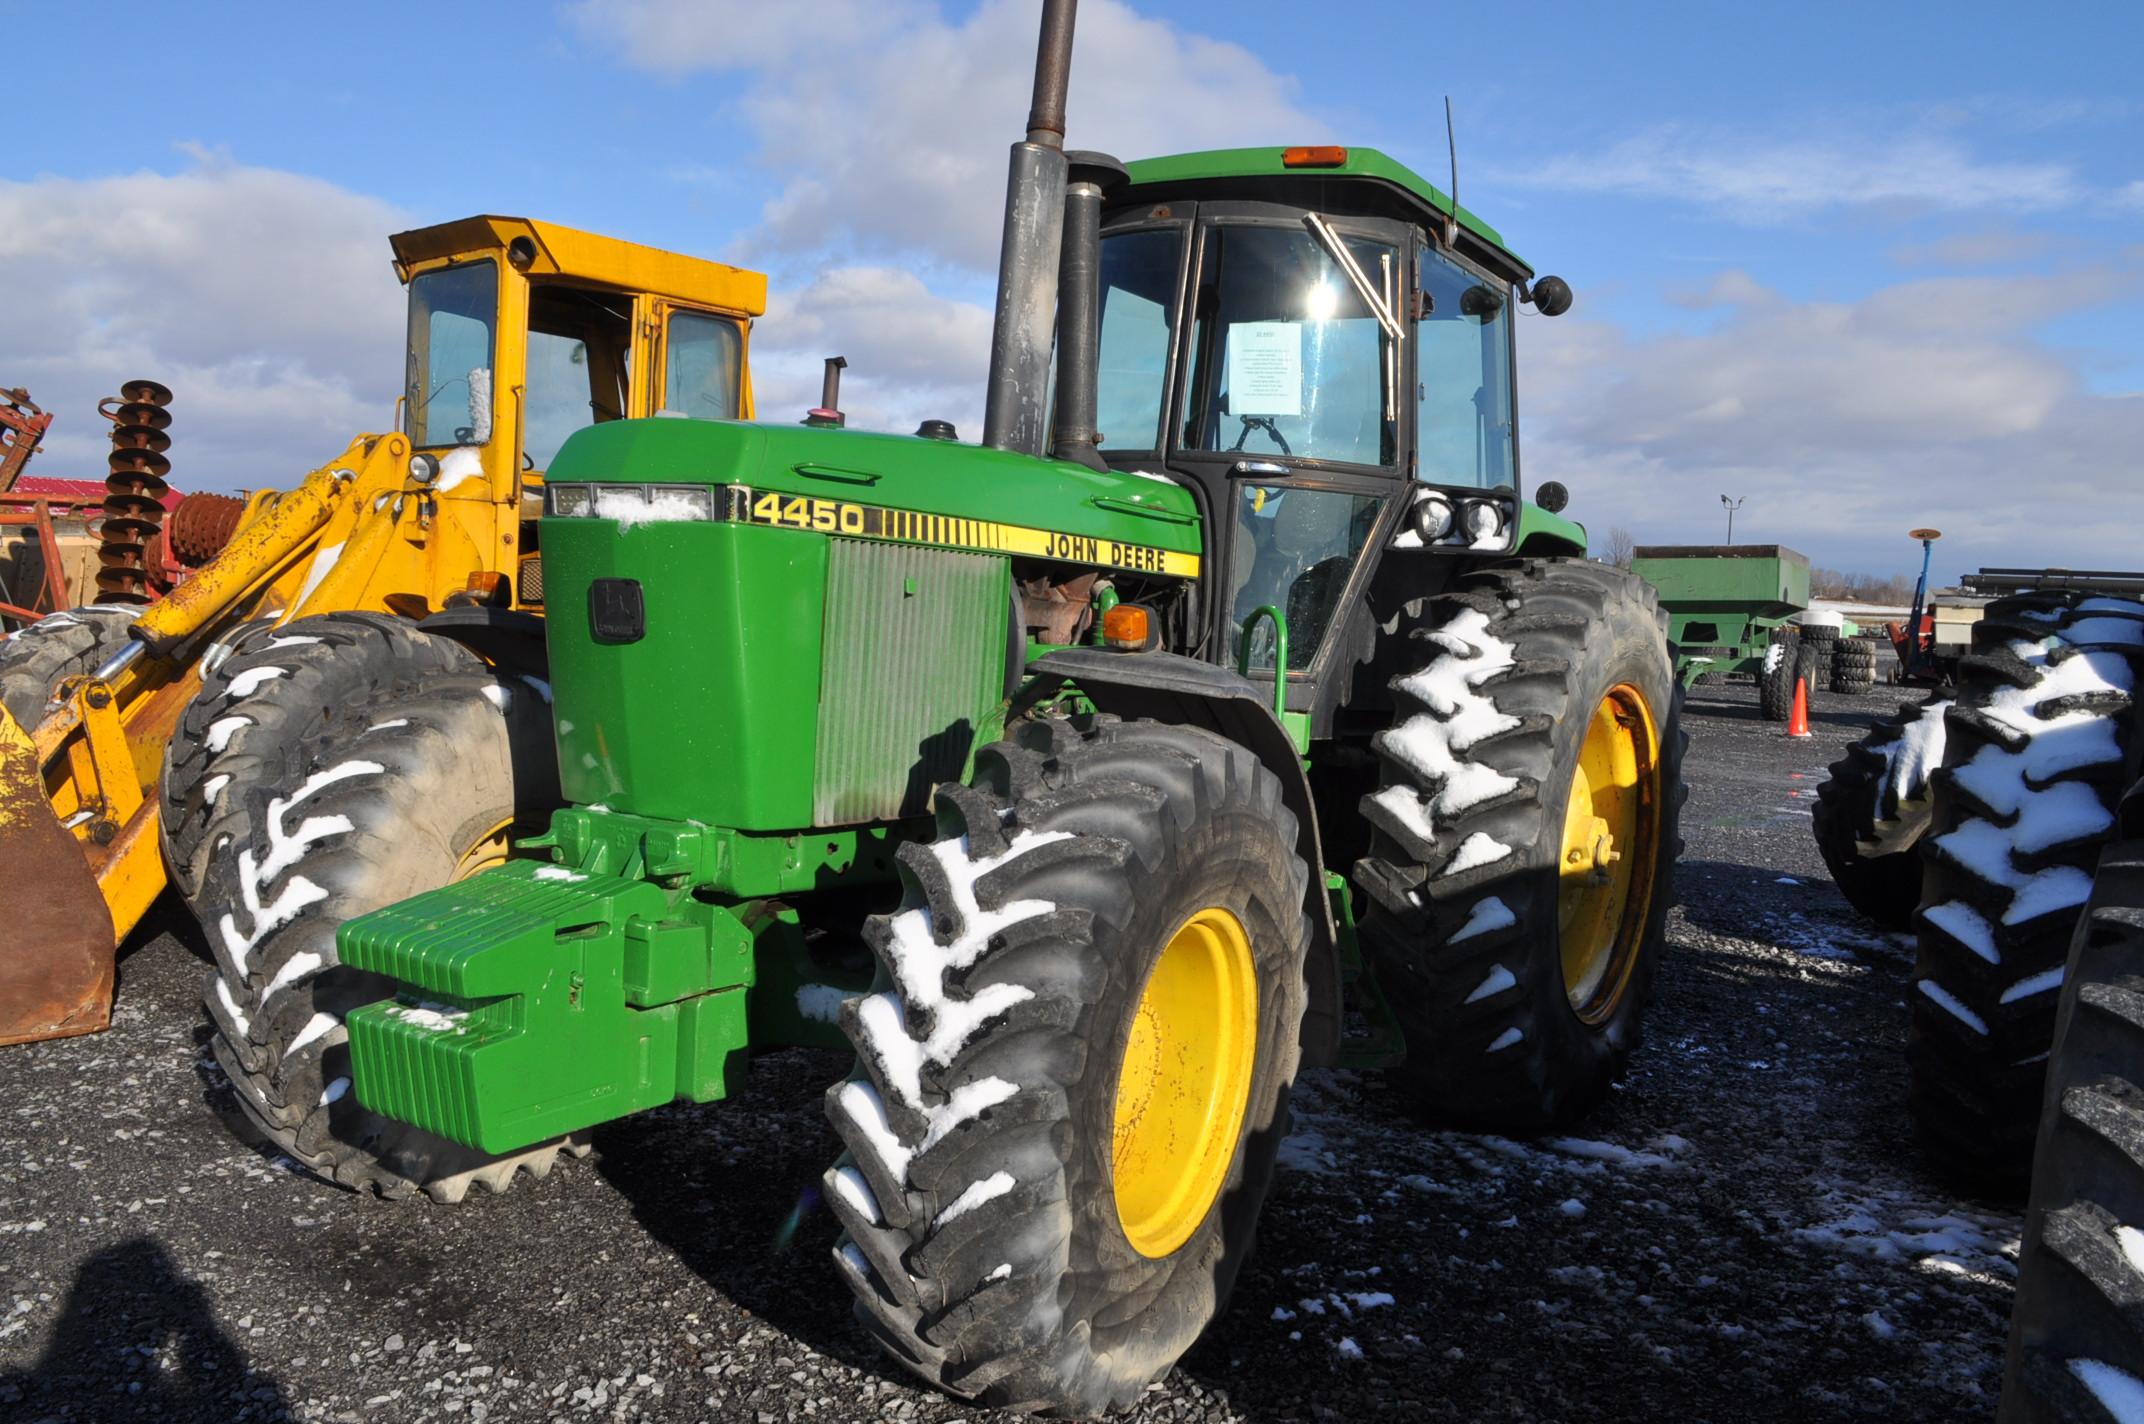 JD 4450 w/ 5,616hrs, 15spd power shift, 4wd, 540/1000 pto, 20.8R42 rear rubber, 10 front weights, 2